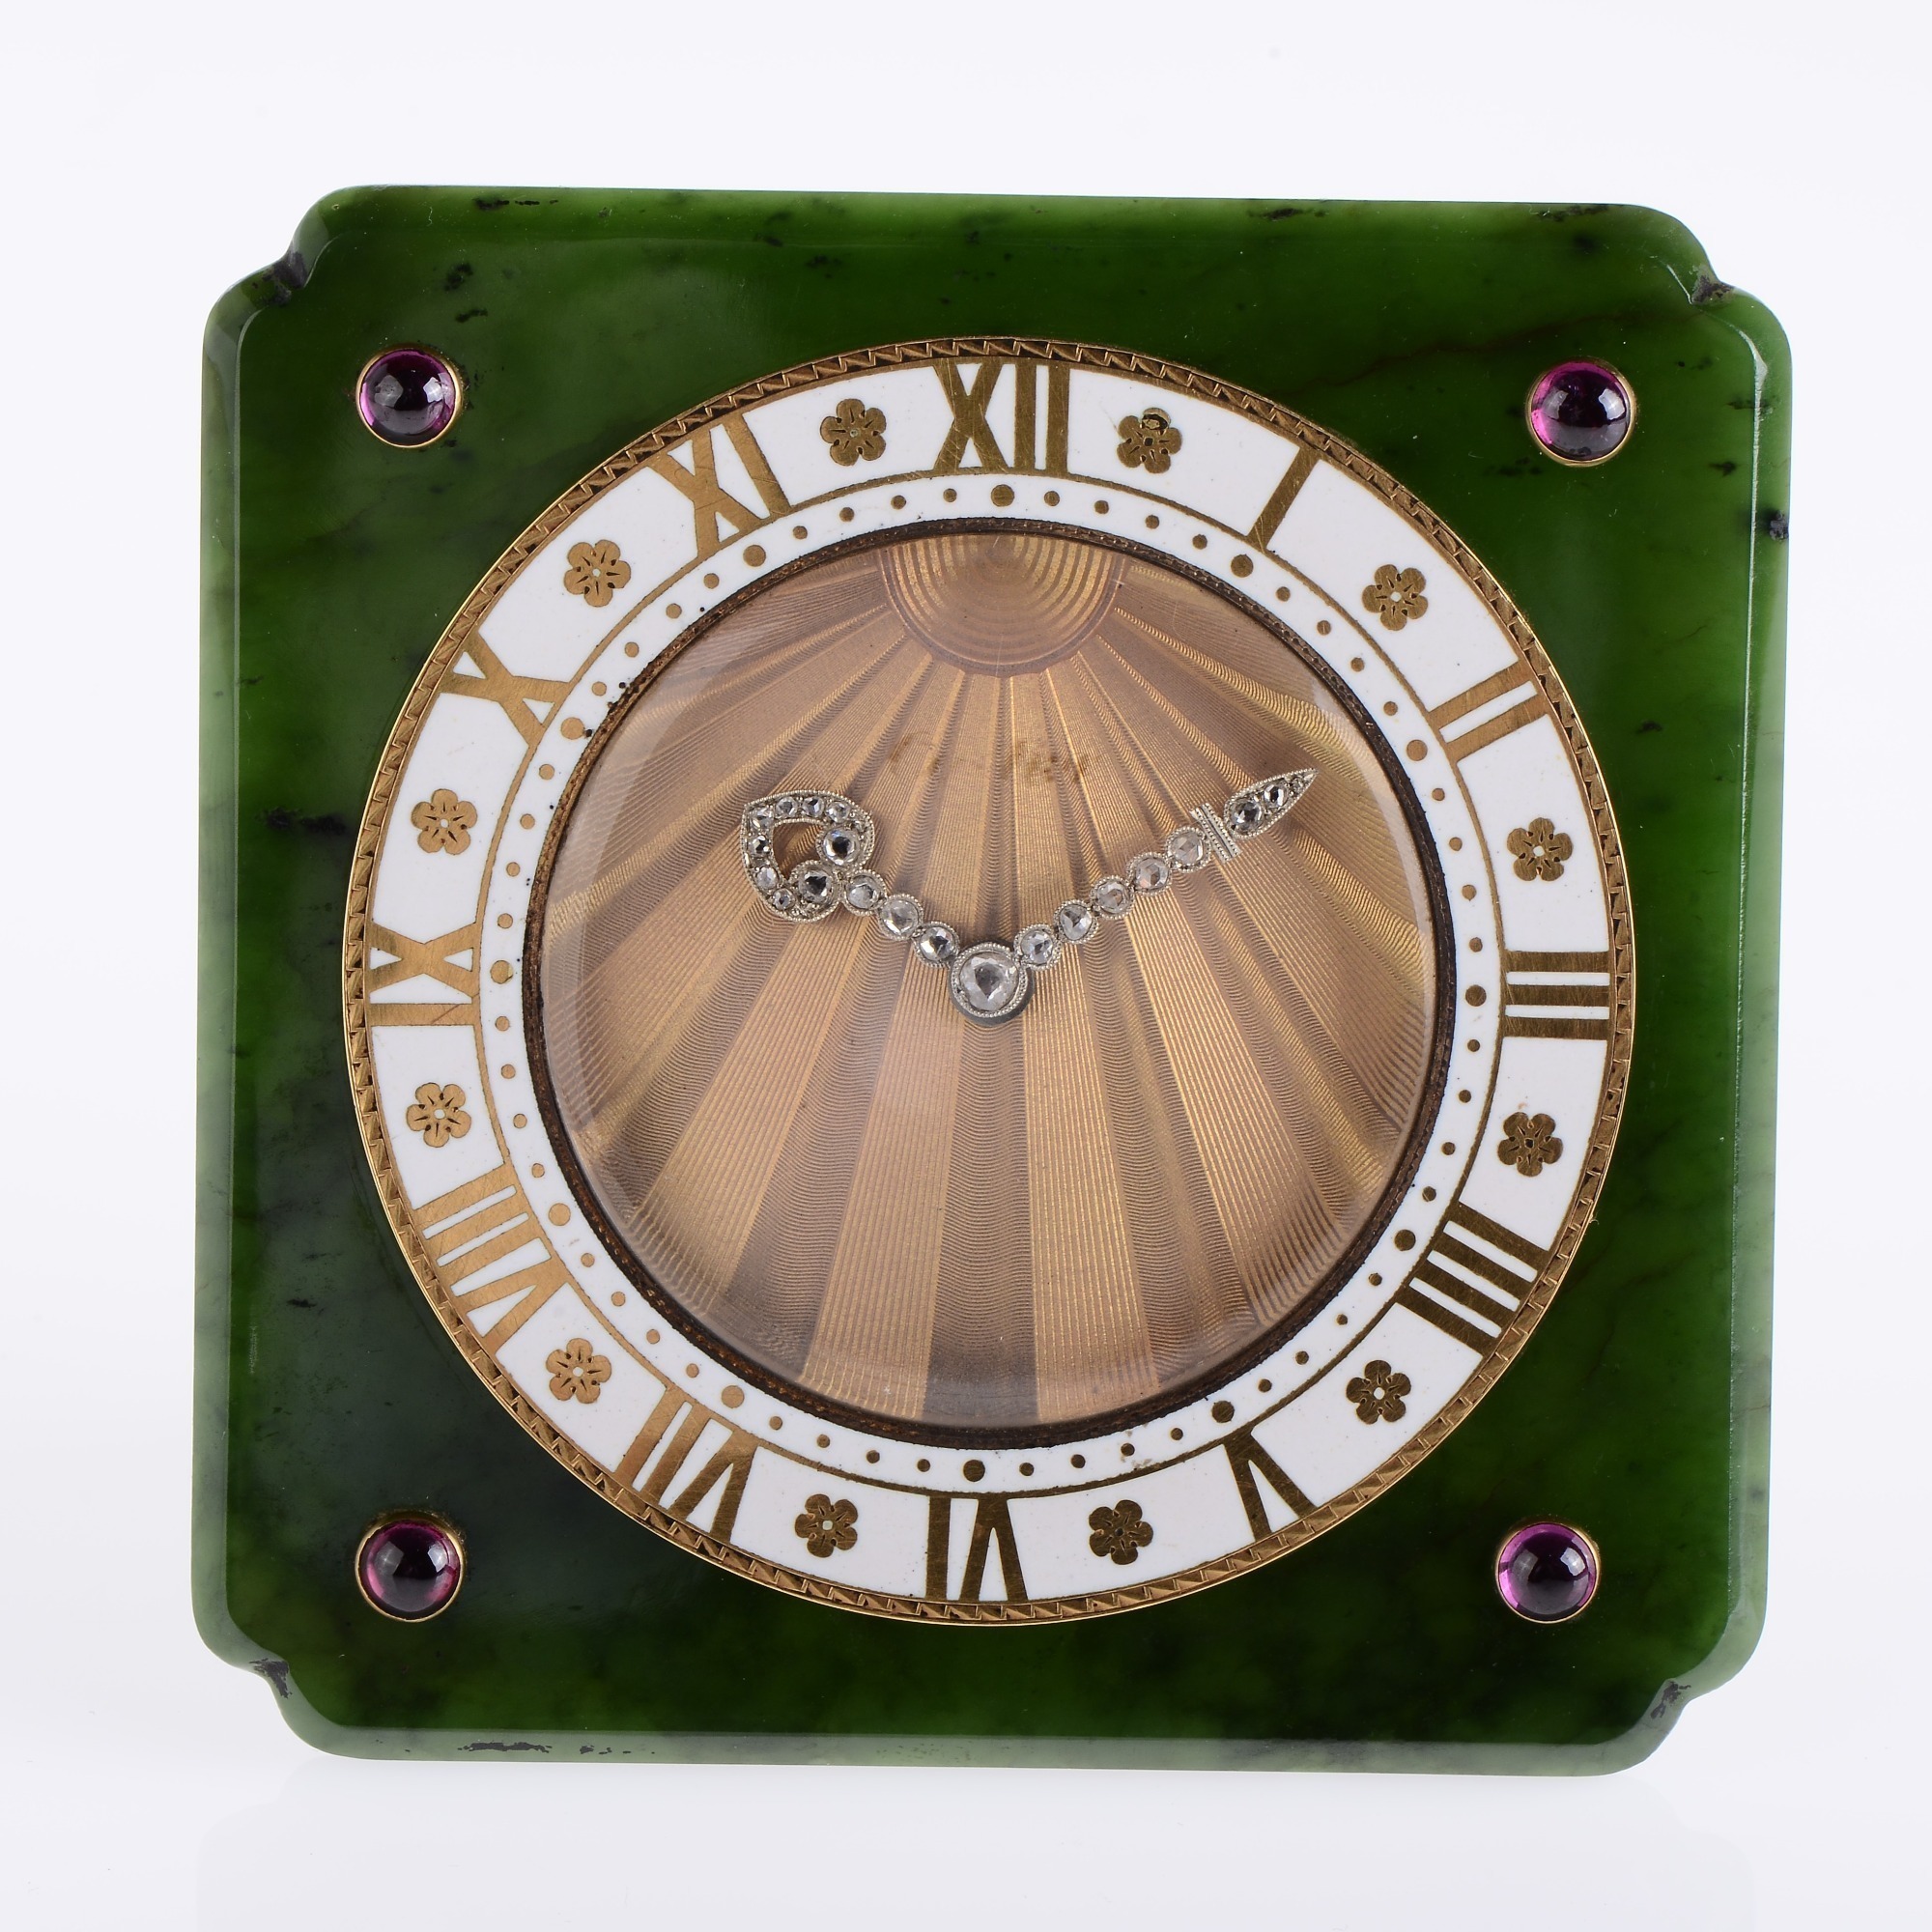 Cartier Art Deco Square Jade Desk Clock Set With Cabochon Rubies Has A Guilloche Dial, Enameled Gold Dial